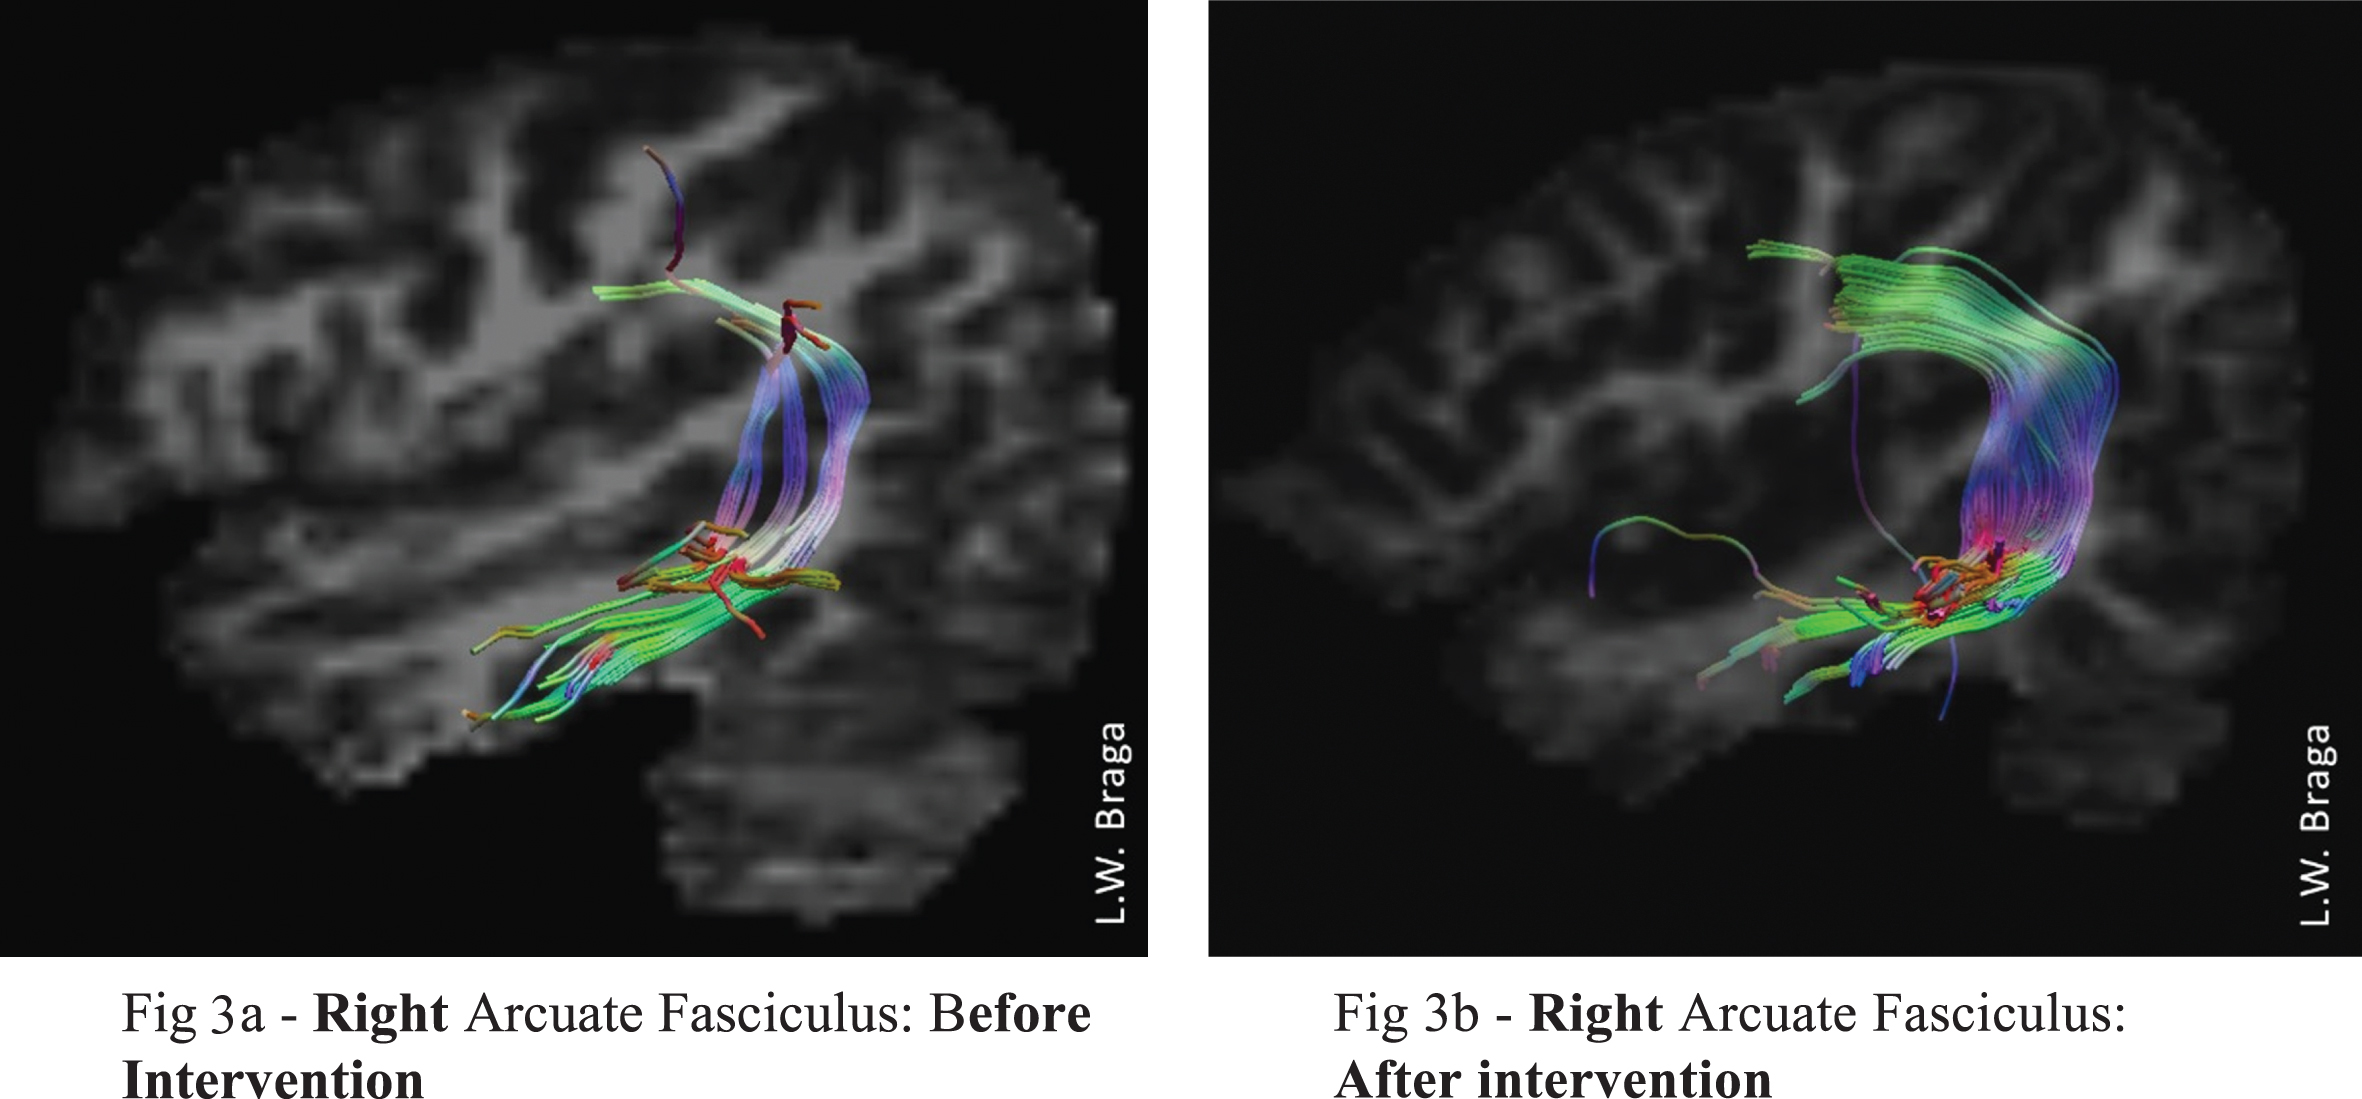 DTI images of TF’s right cerebral hemisphere (a) before intervention and b) after intervention show a neurostructural increase in white matter. There was a significant increase in number of fibers, volume, and length of the right arcuate fasciculus after intervention.